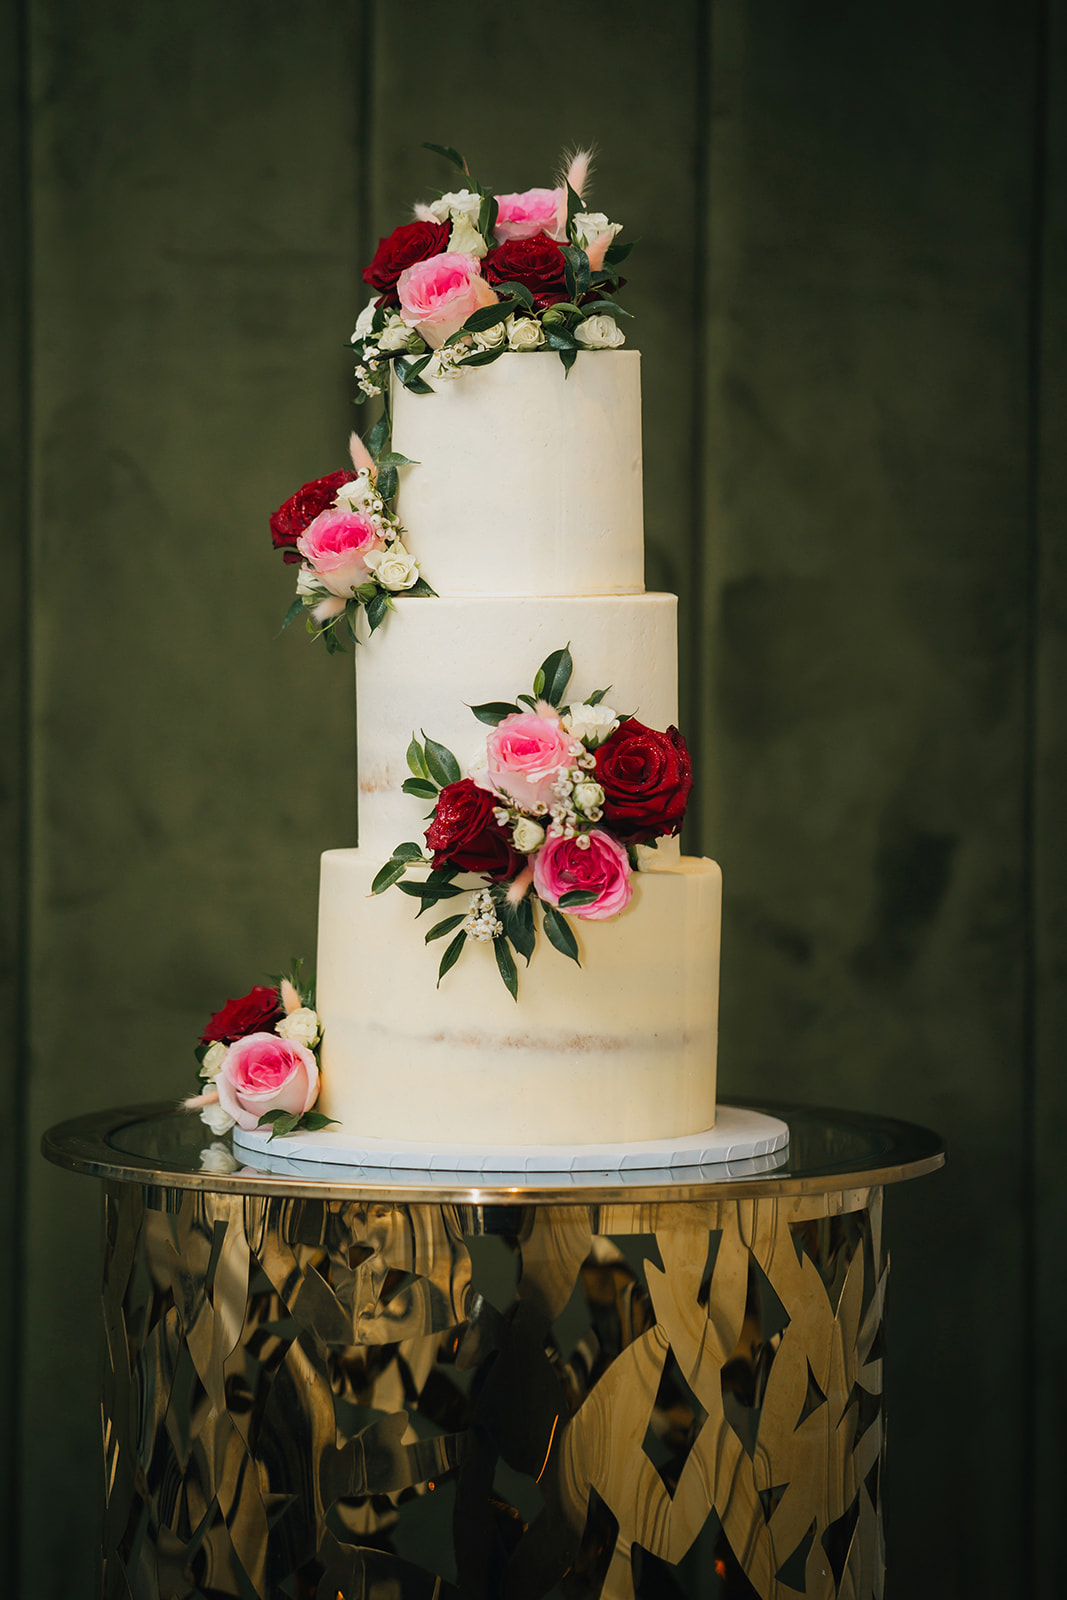 three tiered wedding cake with roses and other wedding flowers